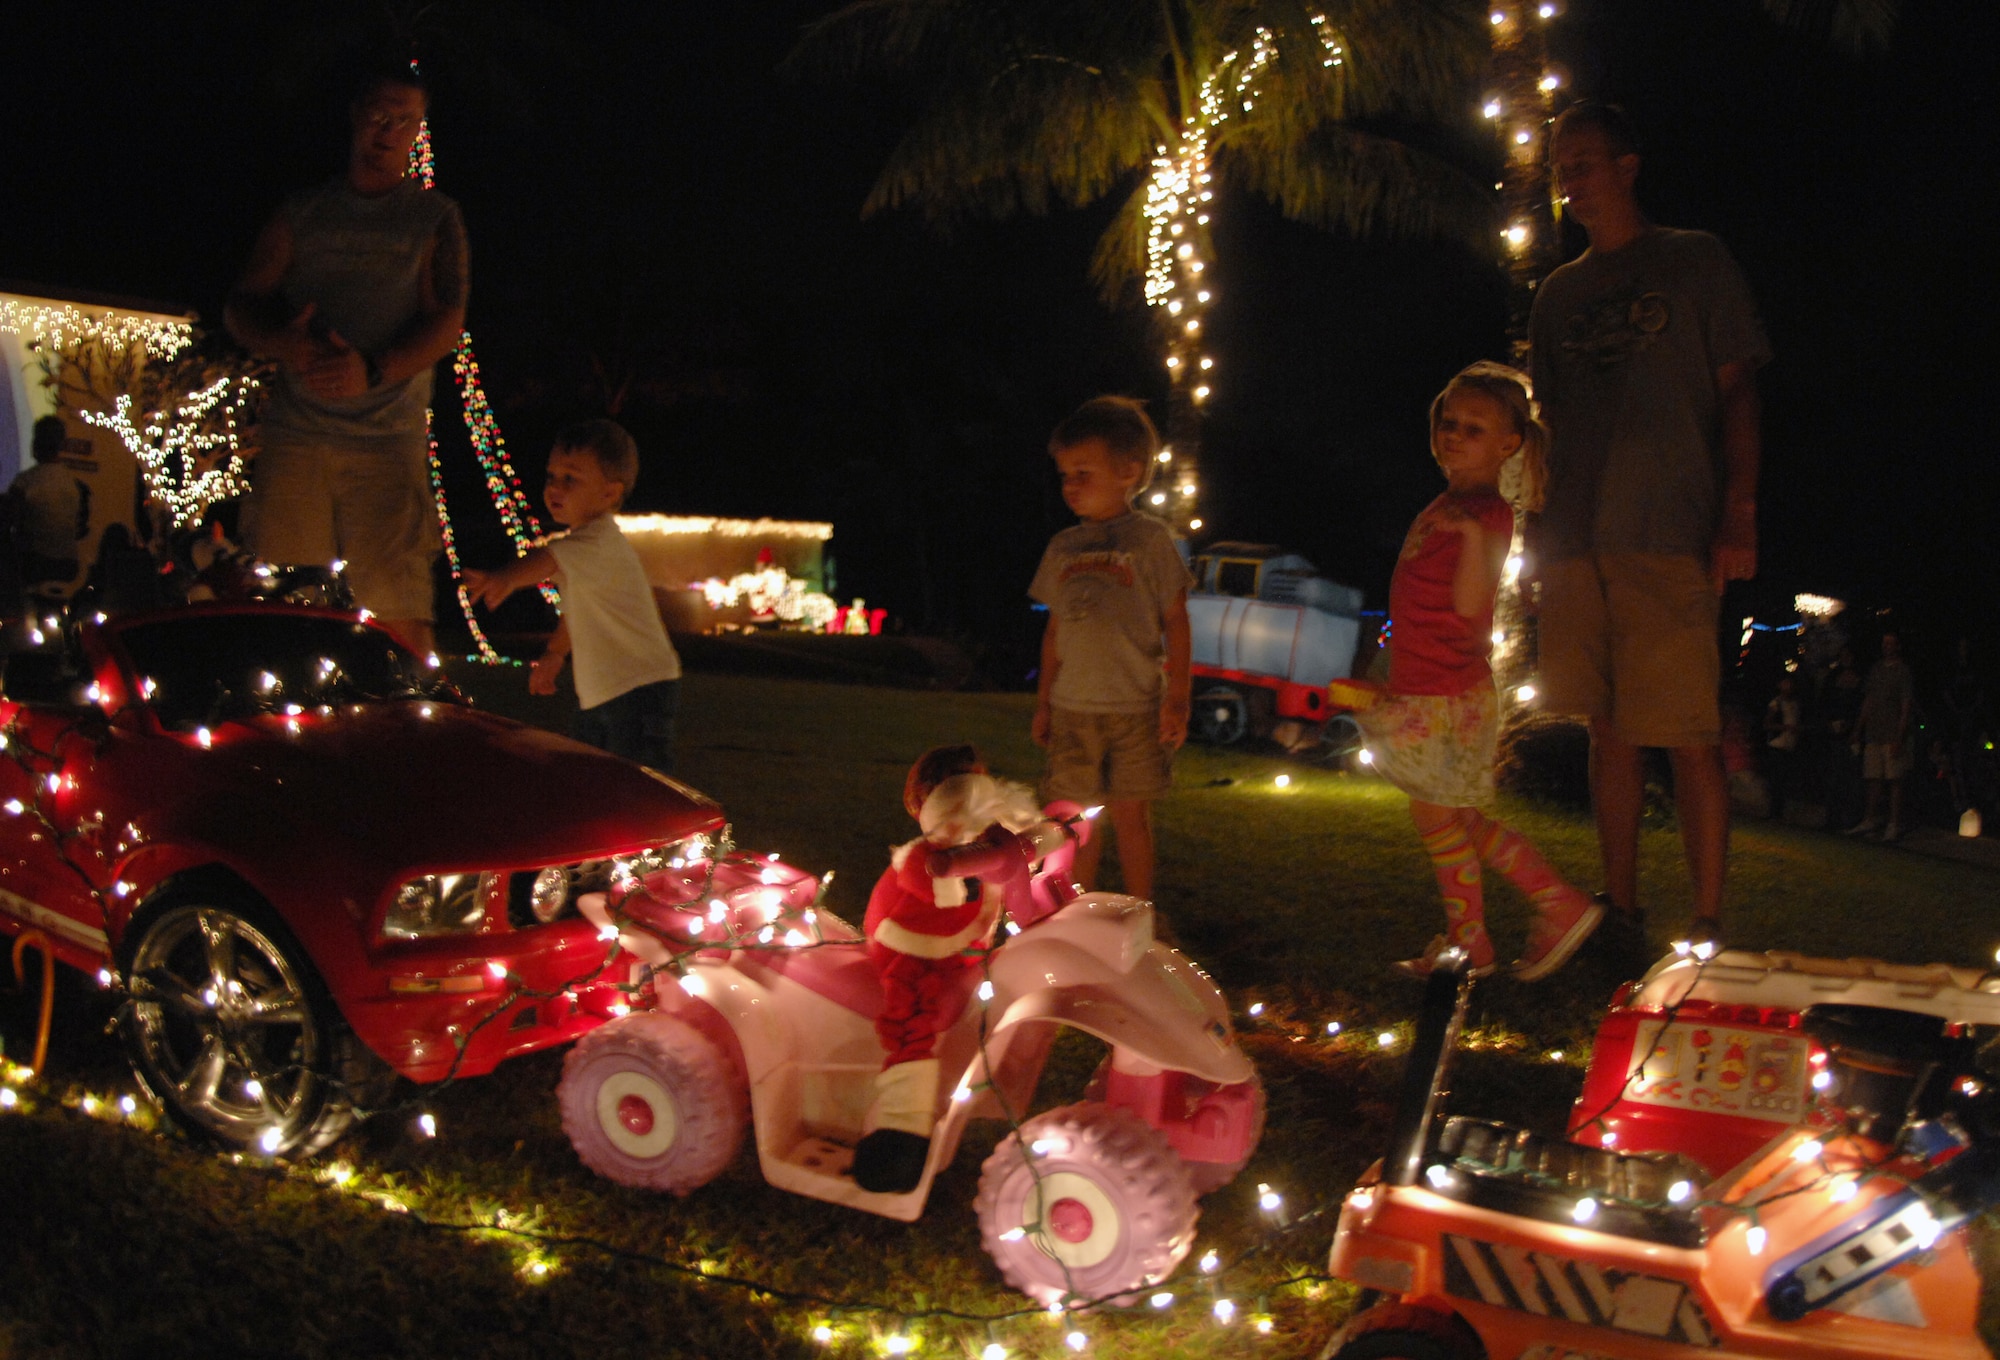 Children and adults alike were treated to a holiday wonderland in the tropics during Rota Walk Dec. 18, on Rota Drive. The street is occupied by commander’s on base, each decorating their house to represent their respective unit.  The event hosted a number attractions including a live Nativity scene hosted by the Andersen Chapel, gospel and elementary school choirs singing carols, and a performance by the Guam High School and Air Force Alaska Brass Band at the 36th Wing Commander, Brig. Gen. John Doucette's house. (U.S. Air Force photo/ Airman 1st Class Anthony Jennings)